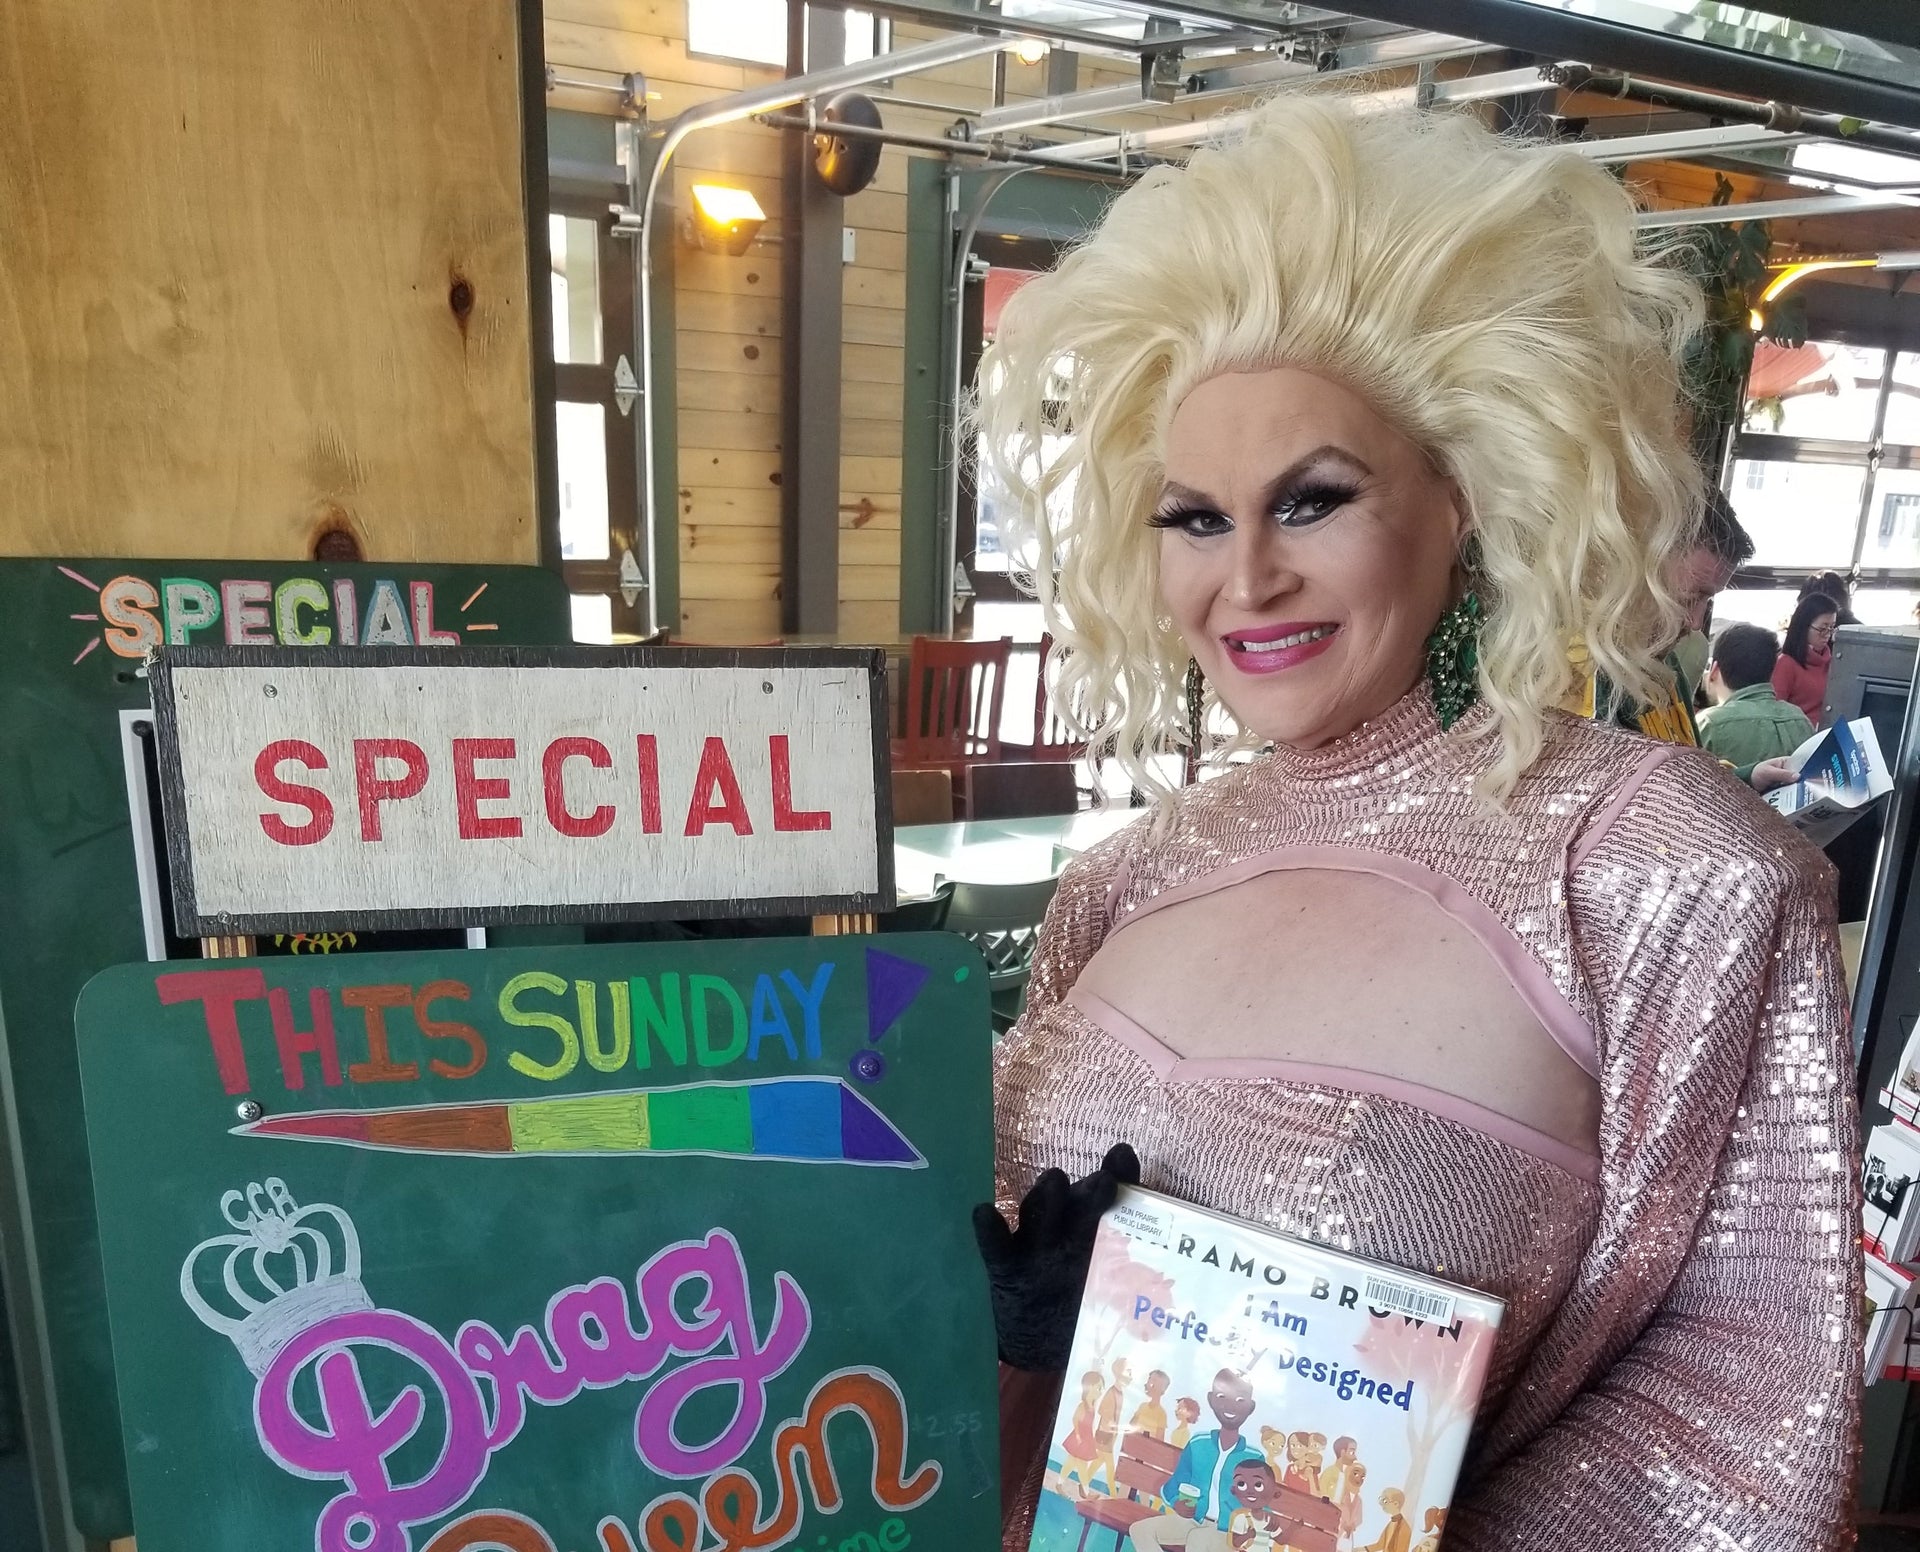 Celebrate Pride with Drag Queen Story Hour @ Colectivo!